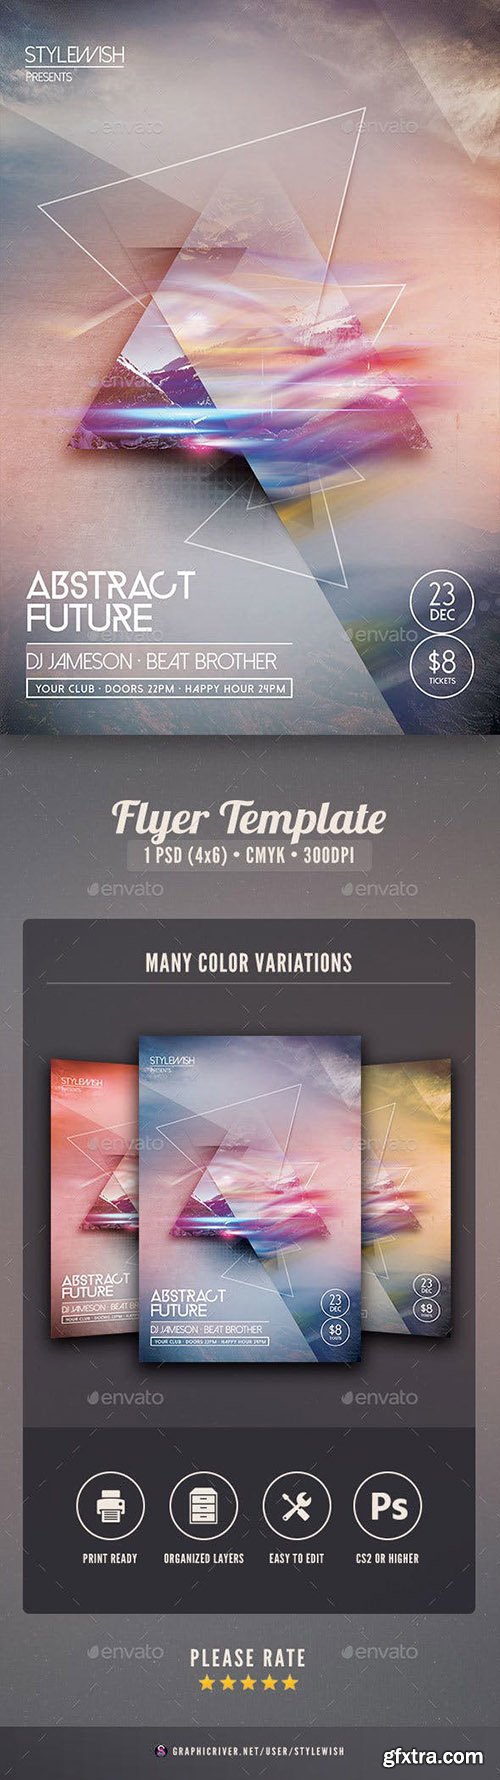 Abstract Future Flyer 9322836